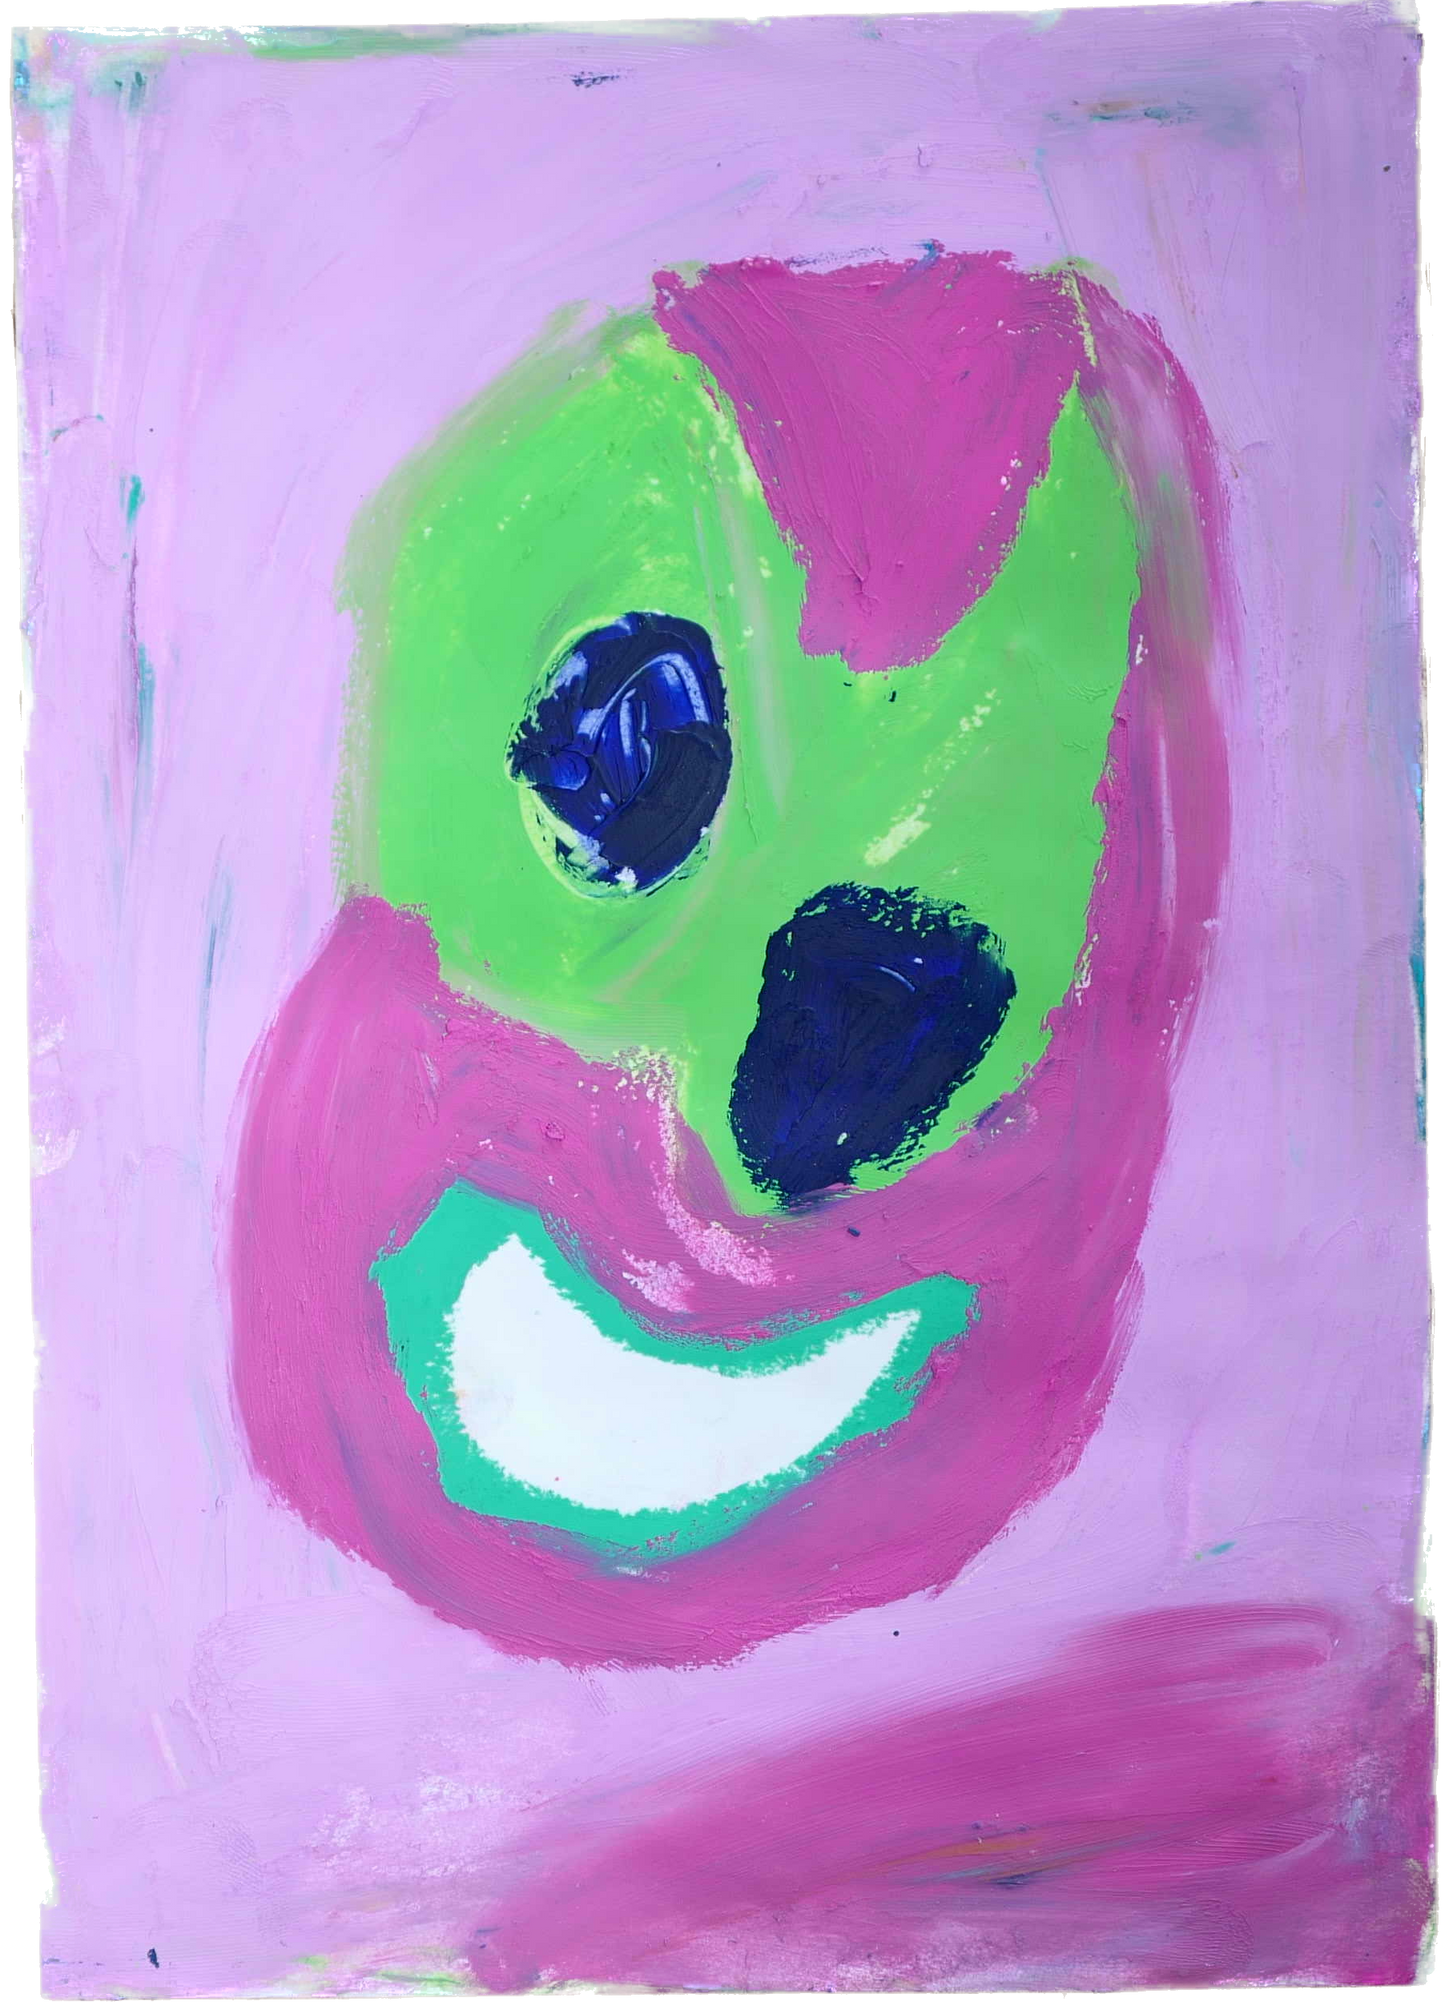 "Lenfantvivant joyful abstract face" "Sauna Fusion playful color mix" "Vibrant abstract expression on paper" "Abstract art with magenta and green hues" "Cheerful Sauna Fusion artwork by Lenfantvivant"